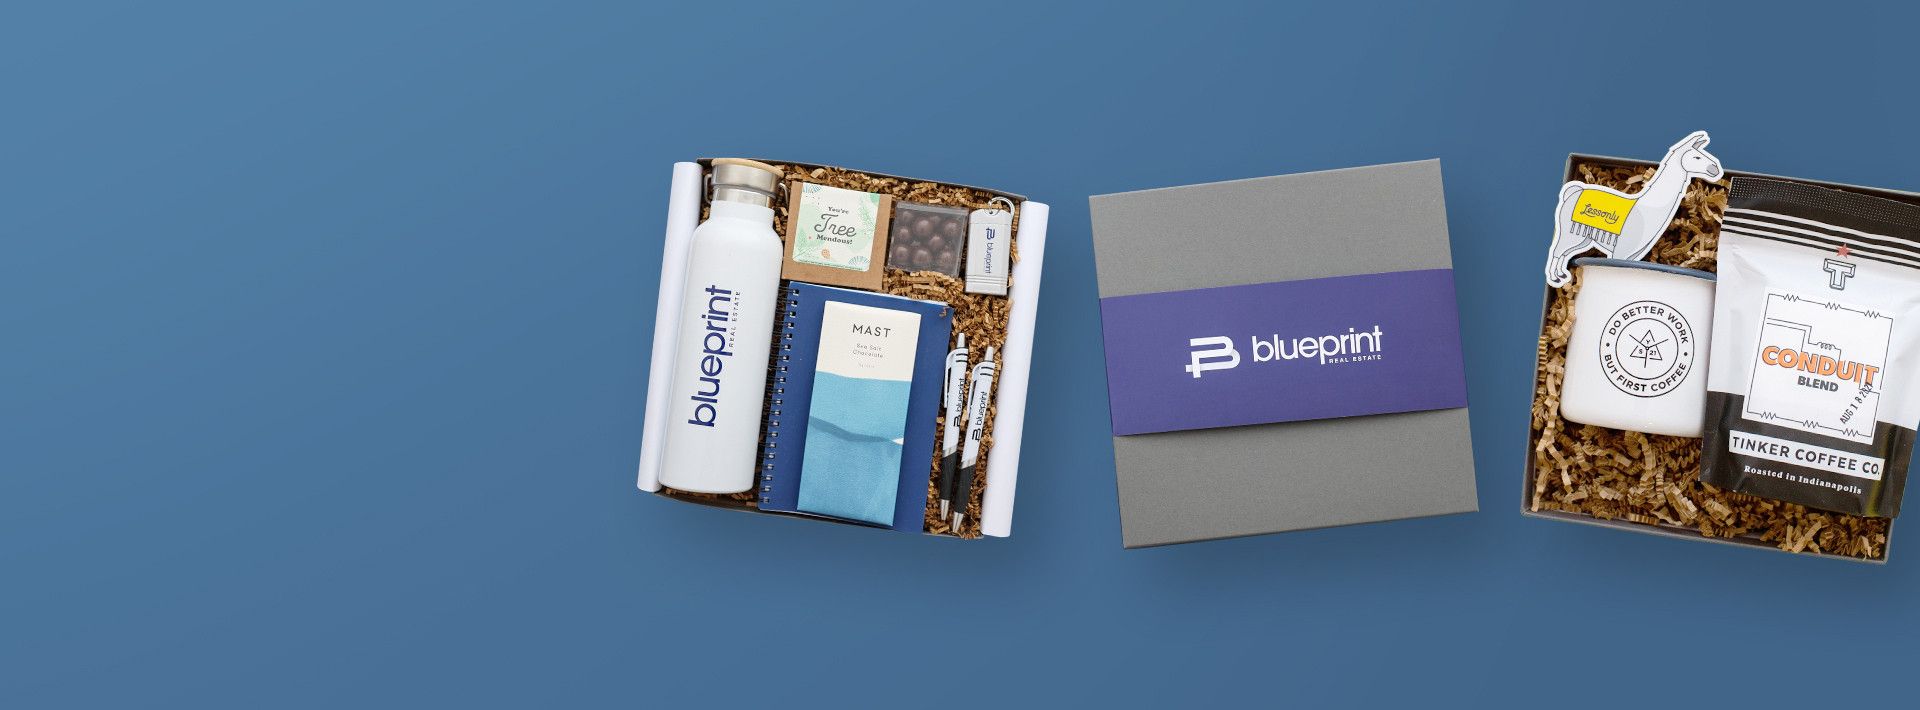 three branded gift boxes on a blue background